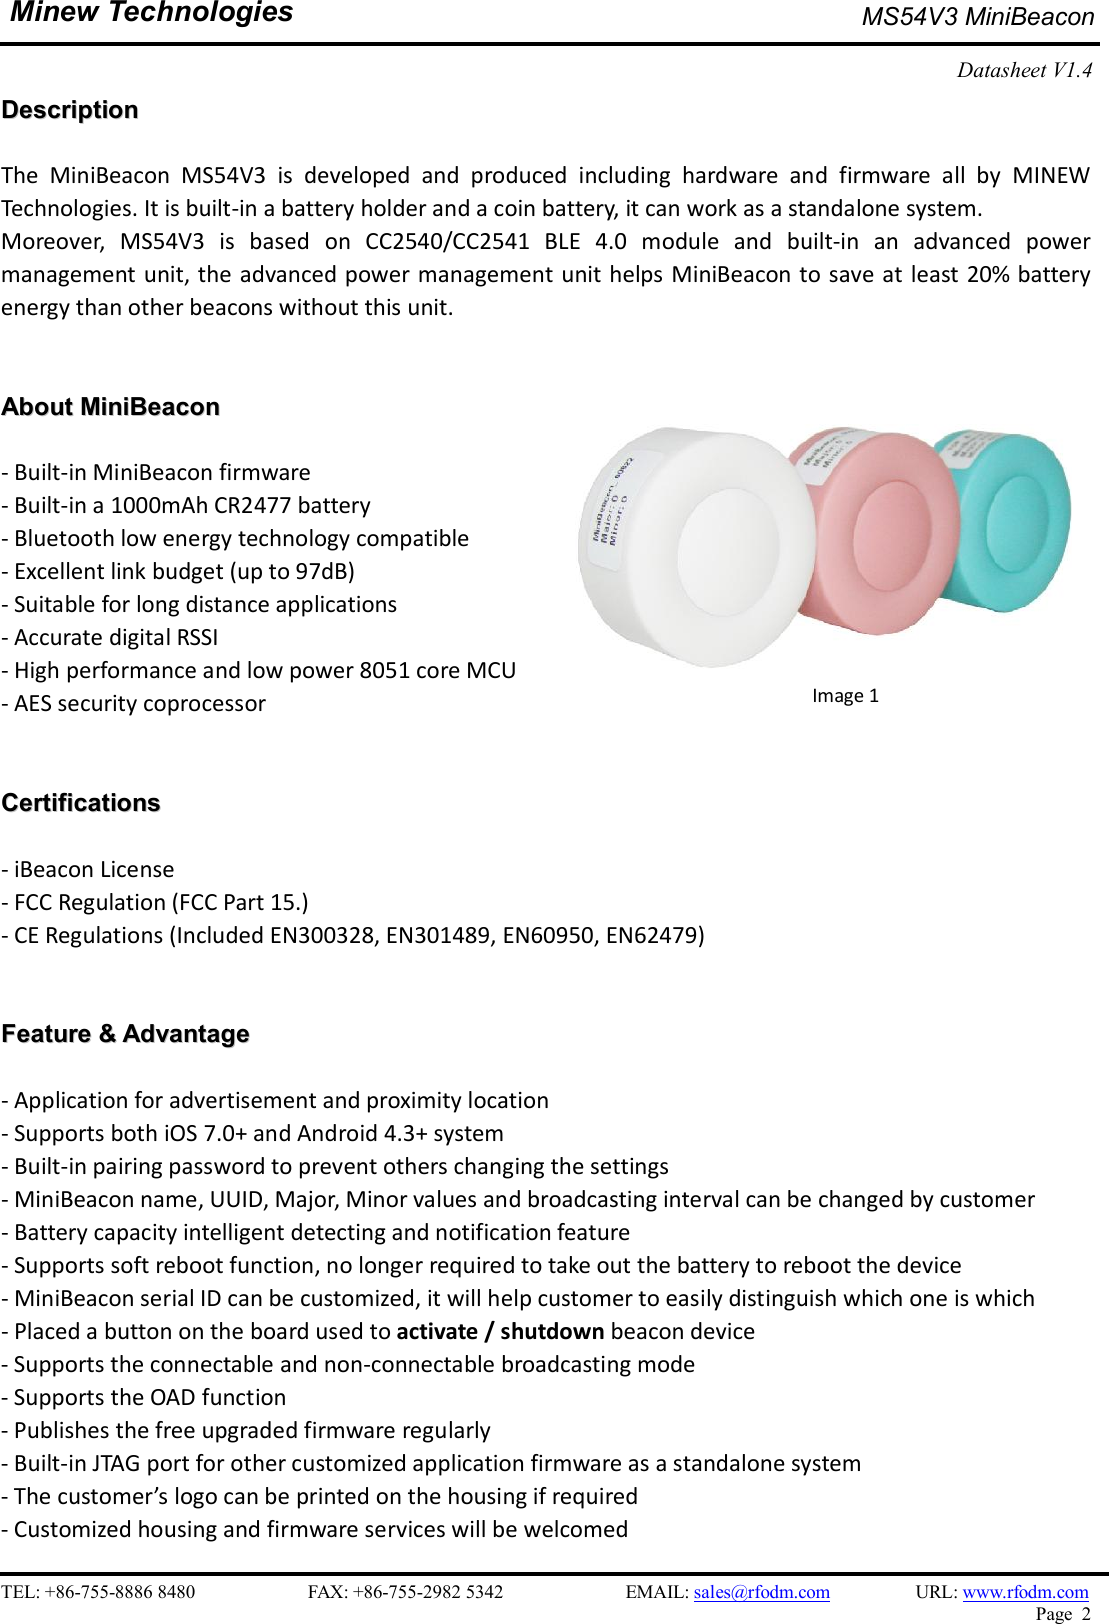    TEL: +86-755-8886 8480                        FAX: +86-755-2982 5342                          EMAIL: sales@rfodm.com         URL: www.rfodm.com   Page  2  Minew Technologies MS54V3 MiniBeacon   Datasheet V1.4    DDeessccrriippttiioonn   The  MiniBeacon  MS54V3  is  developed  and  produced  including  hardware  and  firmware  all  by  MINEW Technologies. It is built-in a battery holder and a coin battery, it can work as a standalone system.   Moreover,  MS54V3  is  based  on  CC2540/CC2541  BLE  4.0  module  and  built-in  an  advanced  power management unit, the advanced power management unit helps MiniBeacon to save at least 20% battery energy than other beacons without this unit.    AAbboouutt  MMiinniiBBeeaaccoonn   - Built-in MiniBeacon firmware   - Built-in a 1000mAh CR2477 battery - Bluetooth low energy technology compatible - Excellent link budget (up to 97dB)   - Suitable for long distance applications - Accurate digital RSSI - High performance and low power 8051 core MCU - AES security coprocessor   CCeerrttiiffiiccaattiioonnss   - iBeacon License   - FCC Regulation (FCC Part 15.) - CE Regulations (Included EN300328, EN301489, EN60950, EN62479)   FFeeaattuurree  &amp;&amp;  AAddvvaannttaaggee   - Application for advertisement and proximity location - Supports both iOS 7.0+ and Android 4.3+ system - Built-in pairing password to prevent others changing the settings - MiniBeacon name, UUID, Major, Minor values and broadcasting interval can be changed by customer - Battery capacity intelligent detecting and notification feature - Supports soft reboot function, no longer required to take out the battery to reboot the device - MiniBeacon serial ID can be customized, it will help customer to easily distinguish which one is which - Placed a button on the board used to activate / shutdown beacon device - Supports the connectable and non-connectable broadcasting mode - Supports the OAD function - Publishes the free upgraded firmware regularly - Built-in JTAG port for other customized application firmware as a standalone system - The customer’s logo can be printed on the housing if required - Customized housing and firmware services will be welcomed                          Image 1 